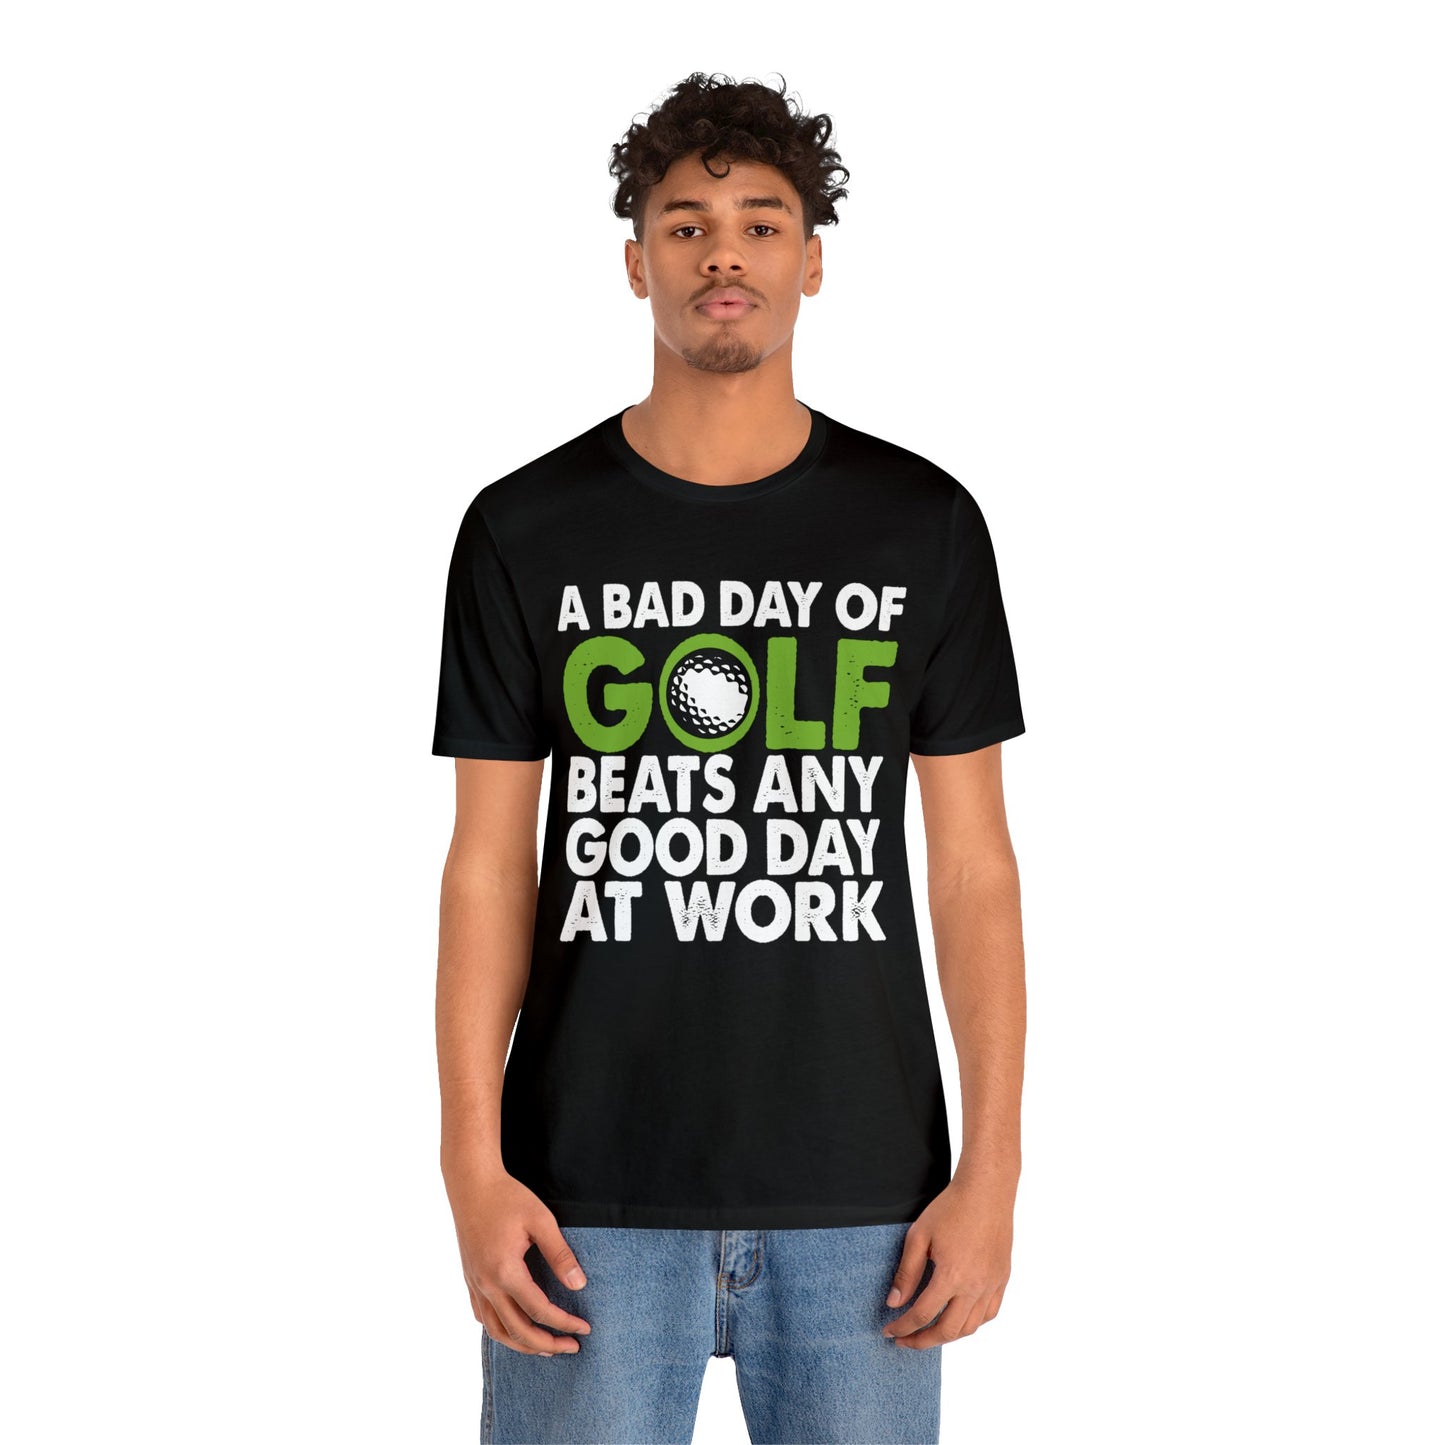 A Bad Day of Golf Beats Any Good Day at Work - Fun and Stylish Golf Enthusiast T-Shirt